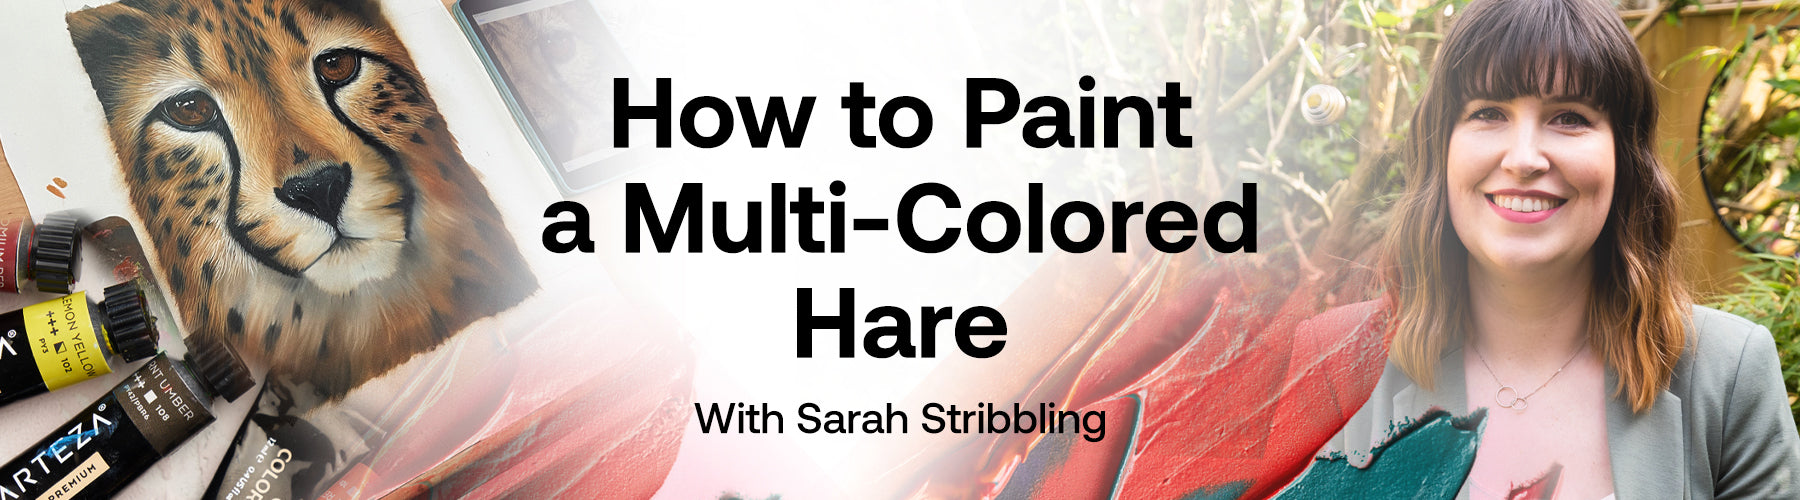 How to Paint a Multi-Colored Hare with Sarah Stribbling